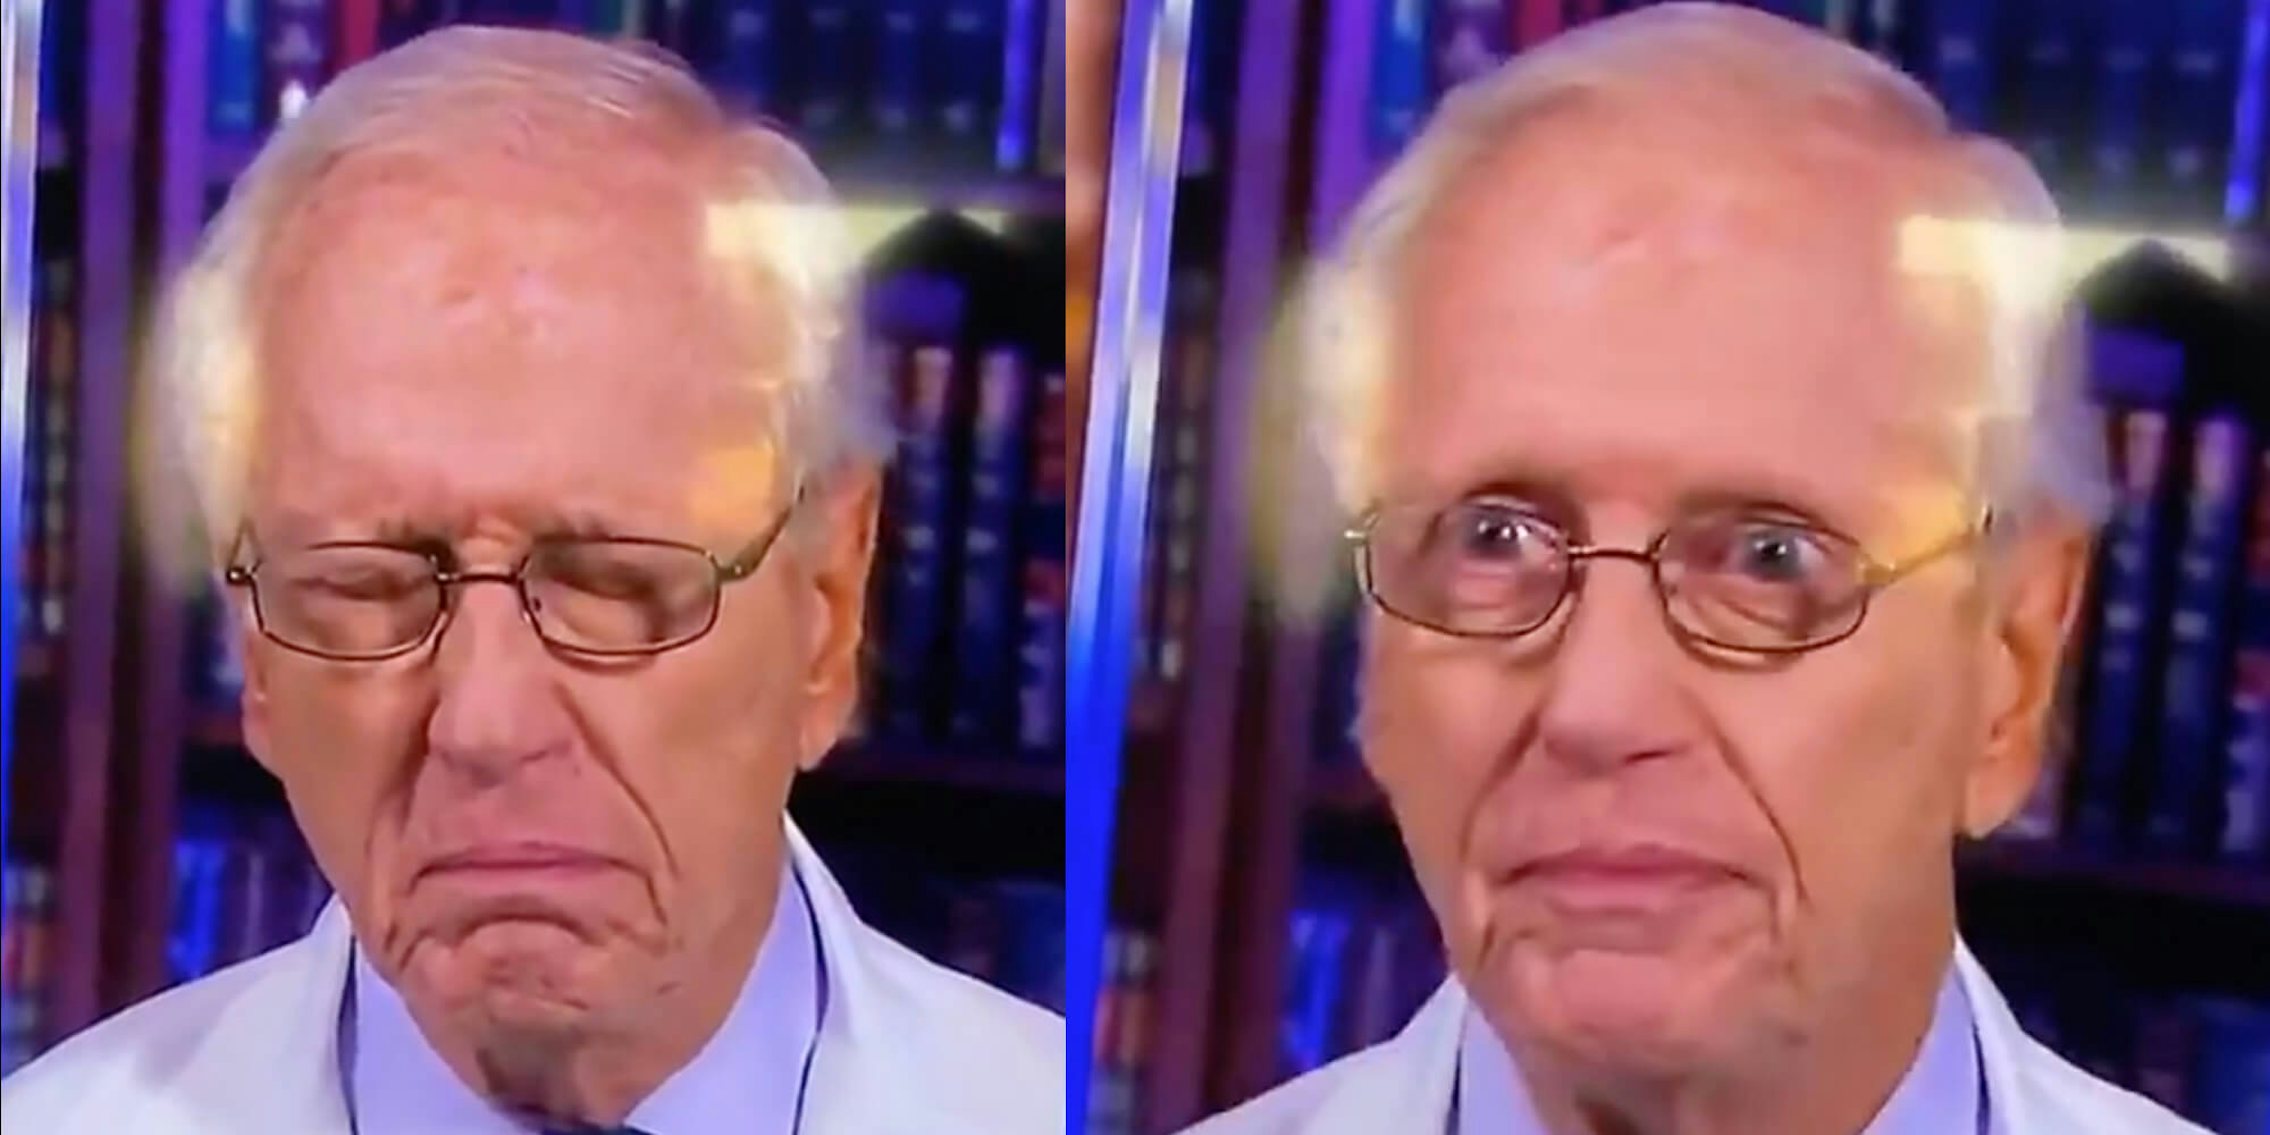 A doctor trying to hold in a sneeze on CNN